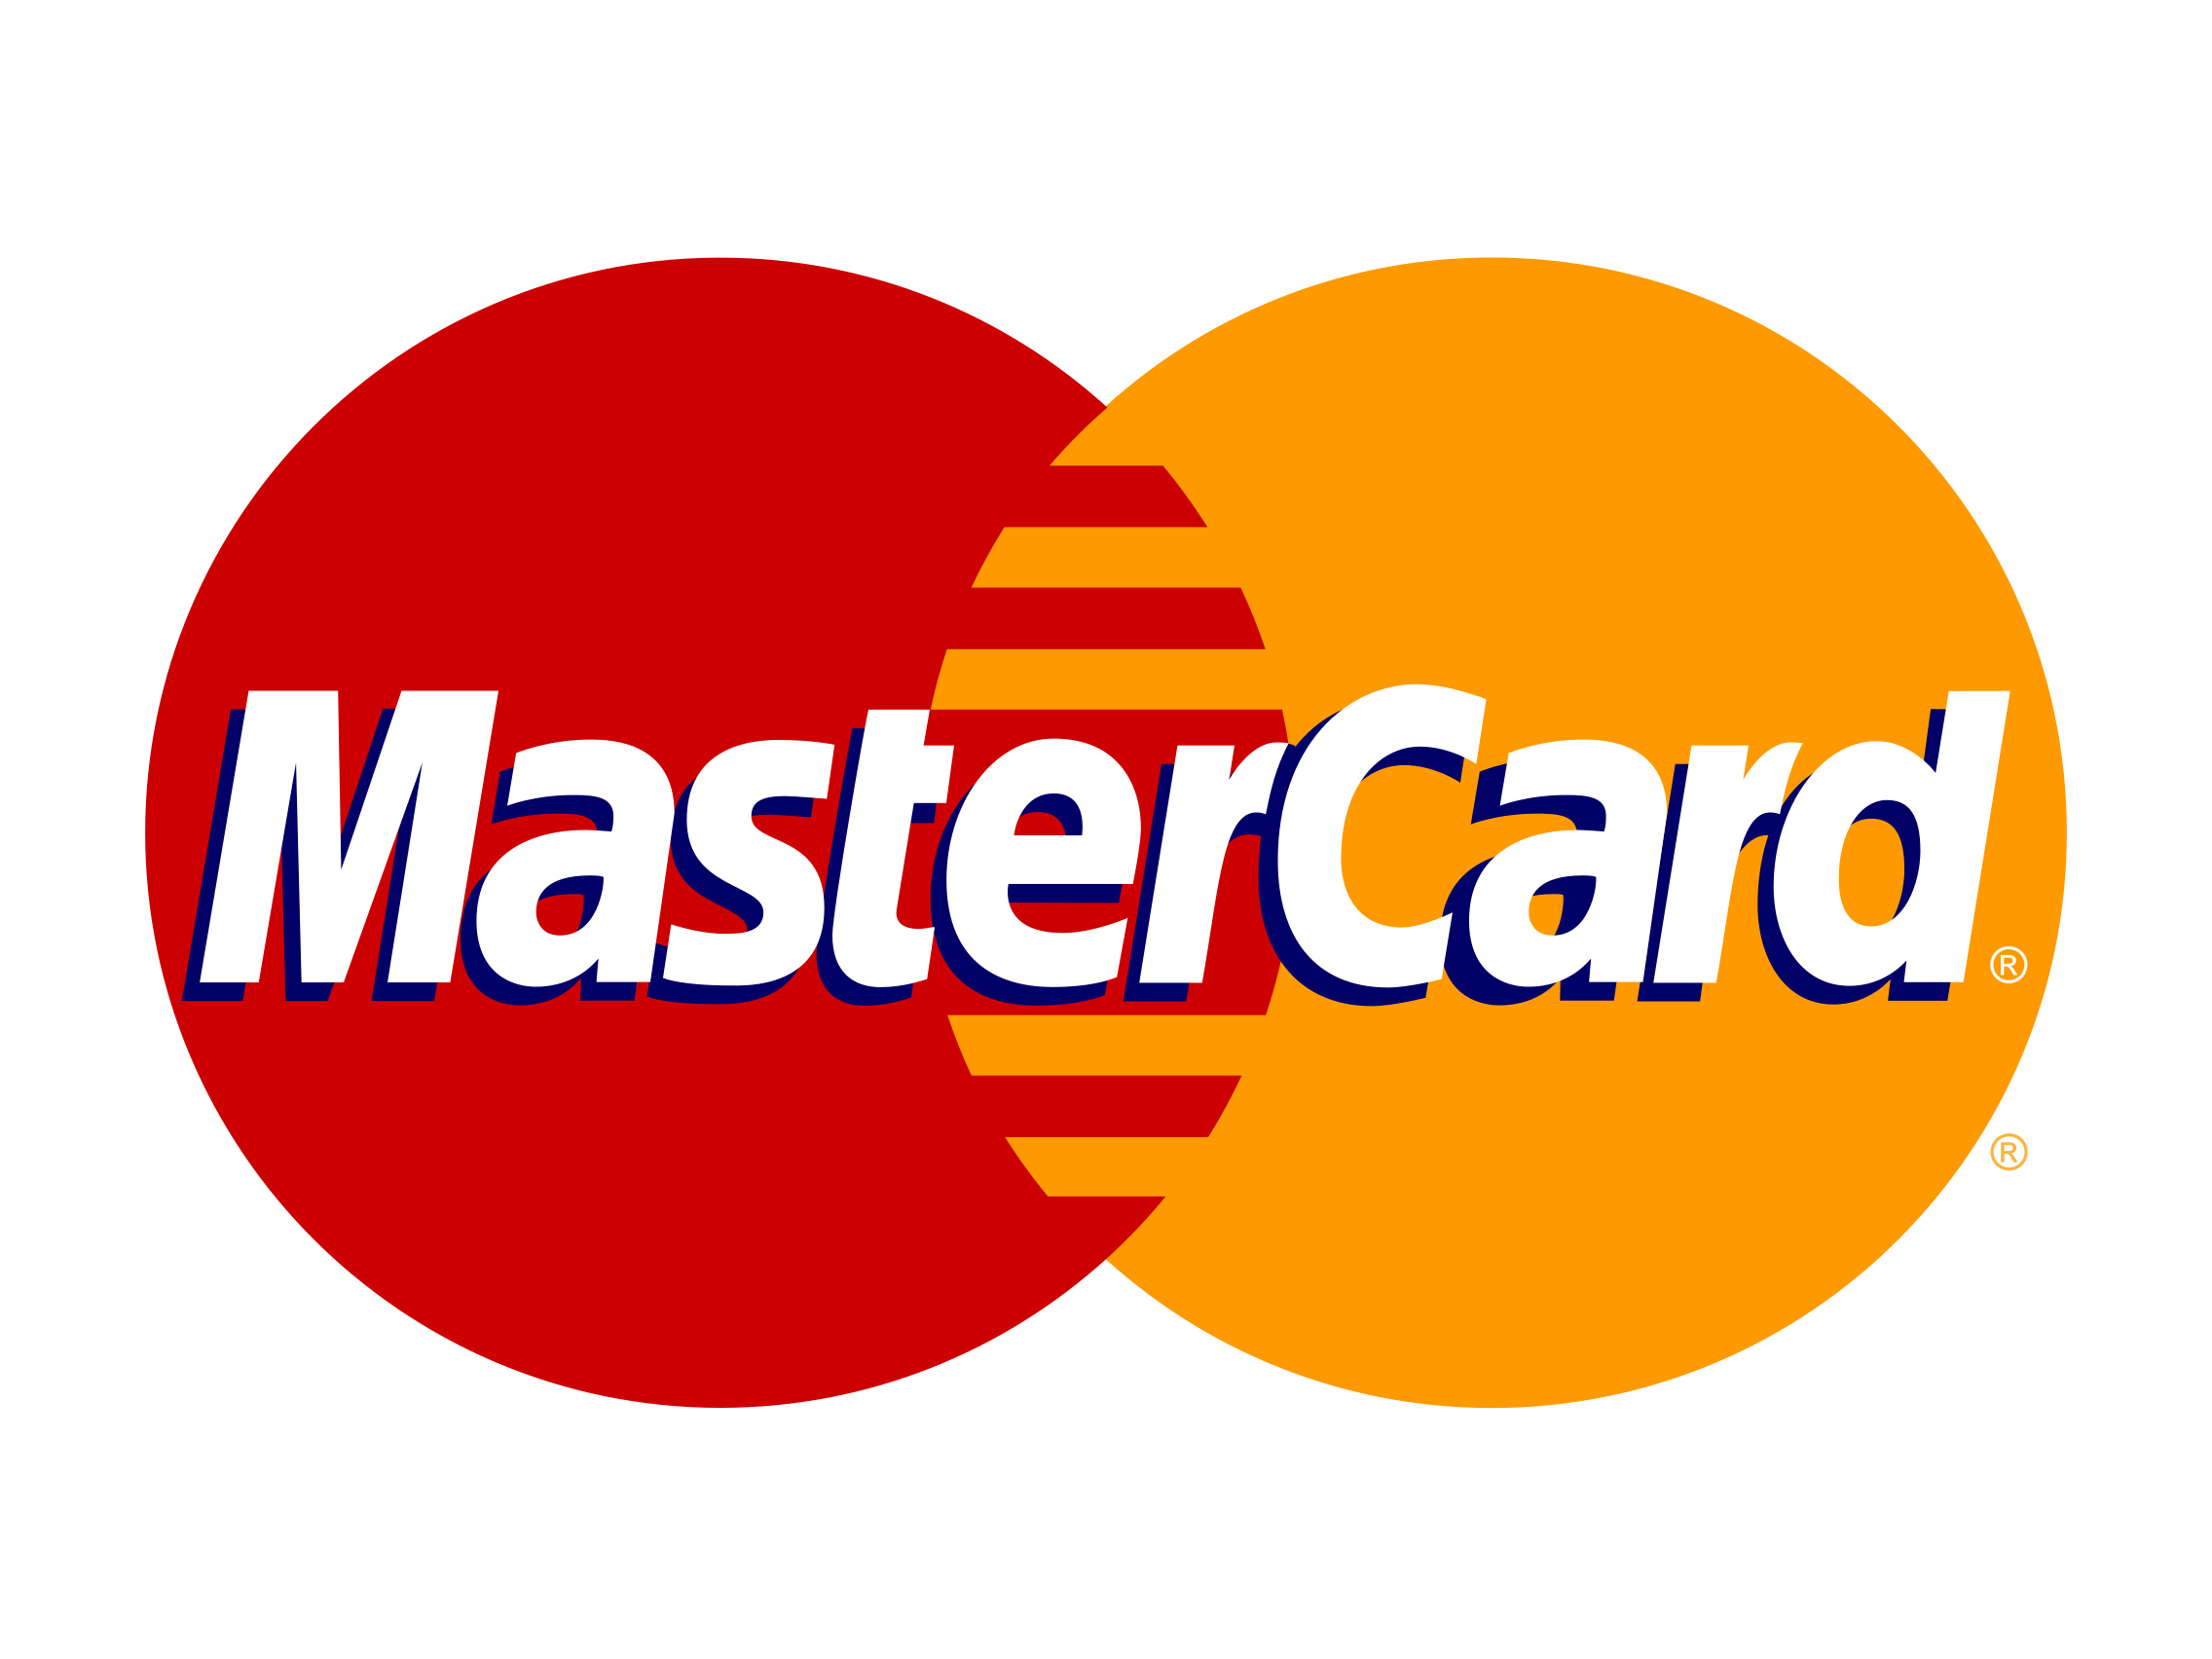 Mastercard: Logo evolution, One of the most widely recognized and respected brands in the world. 2280x1710 HD Wallpaper.